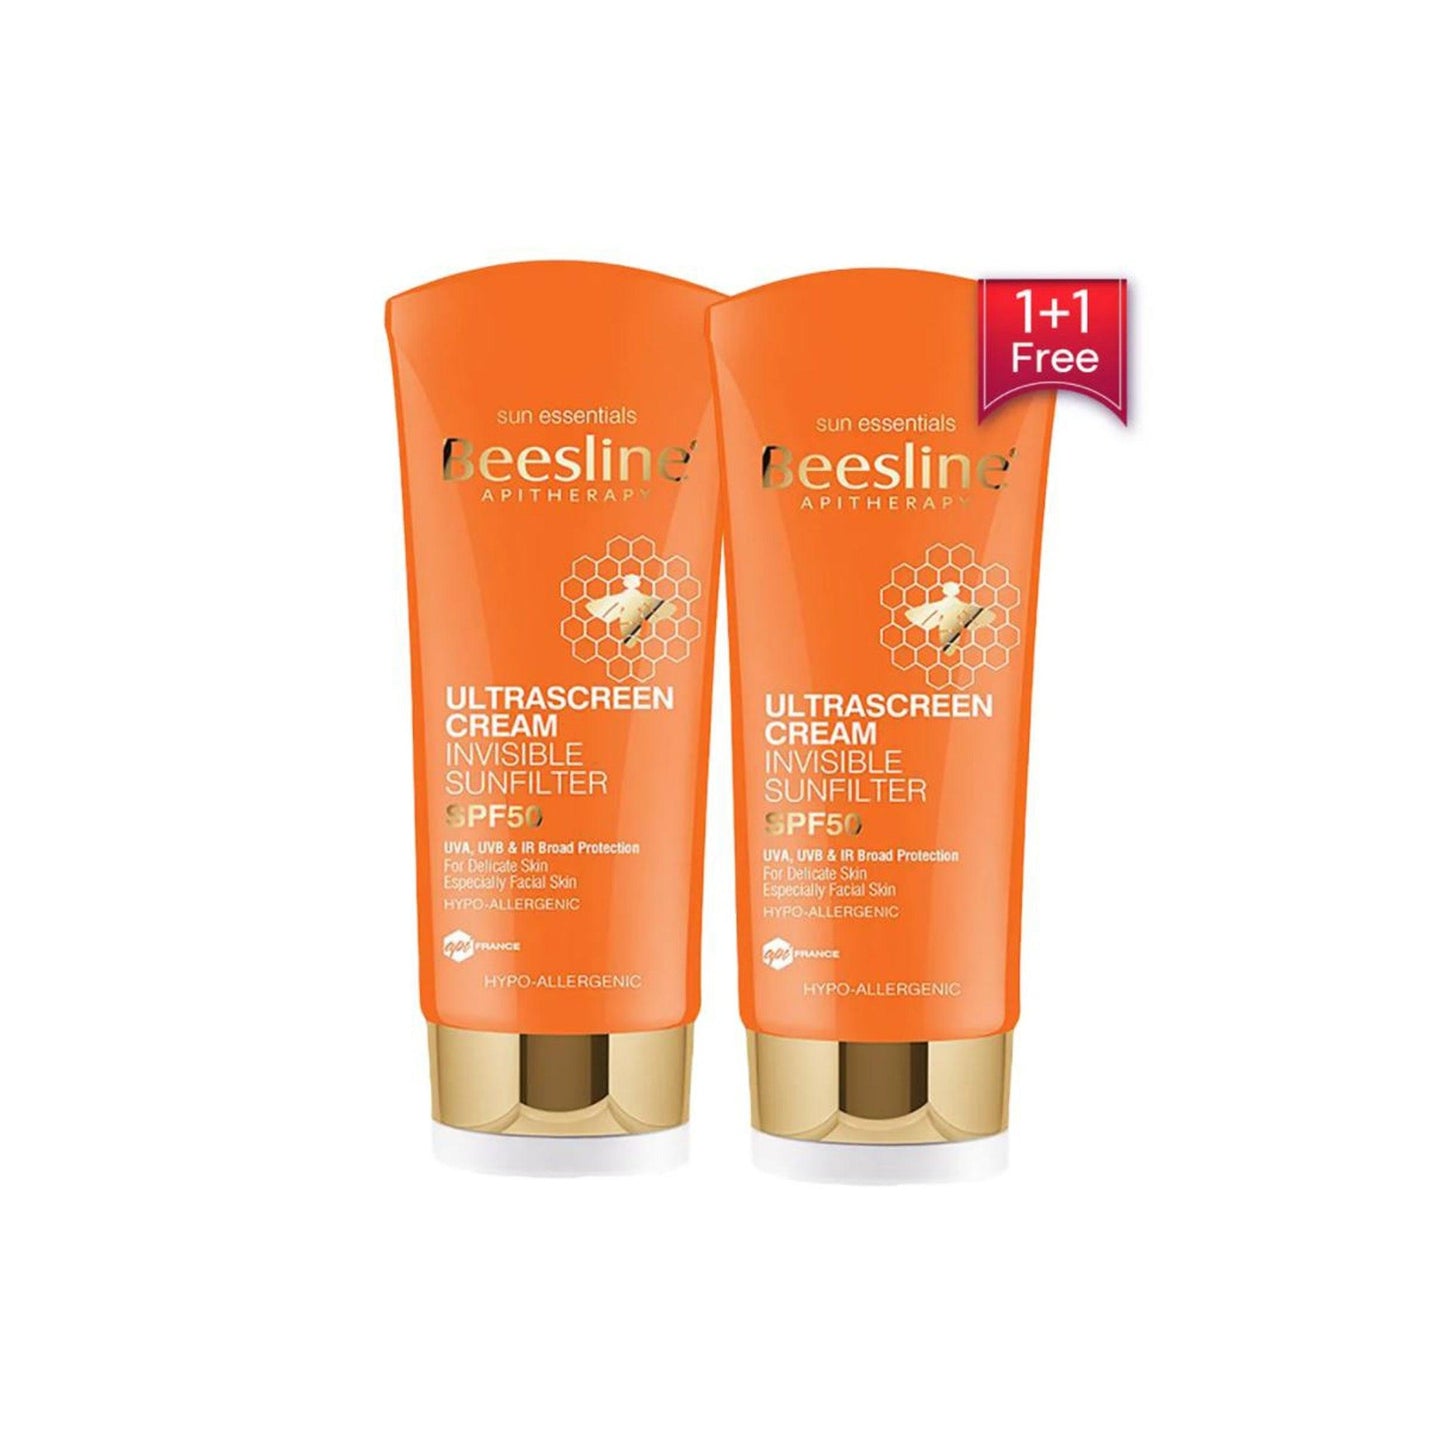 Beesline Ultrascreen cream invisible sunfilter spf 50 1 1 free - Beauty Bounty